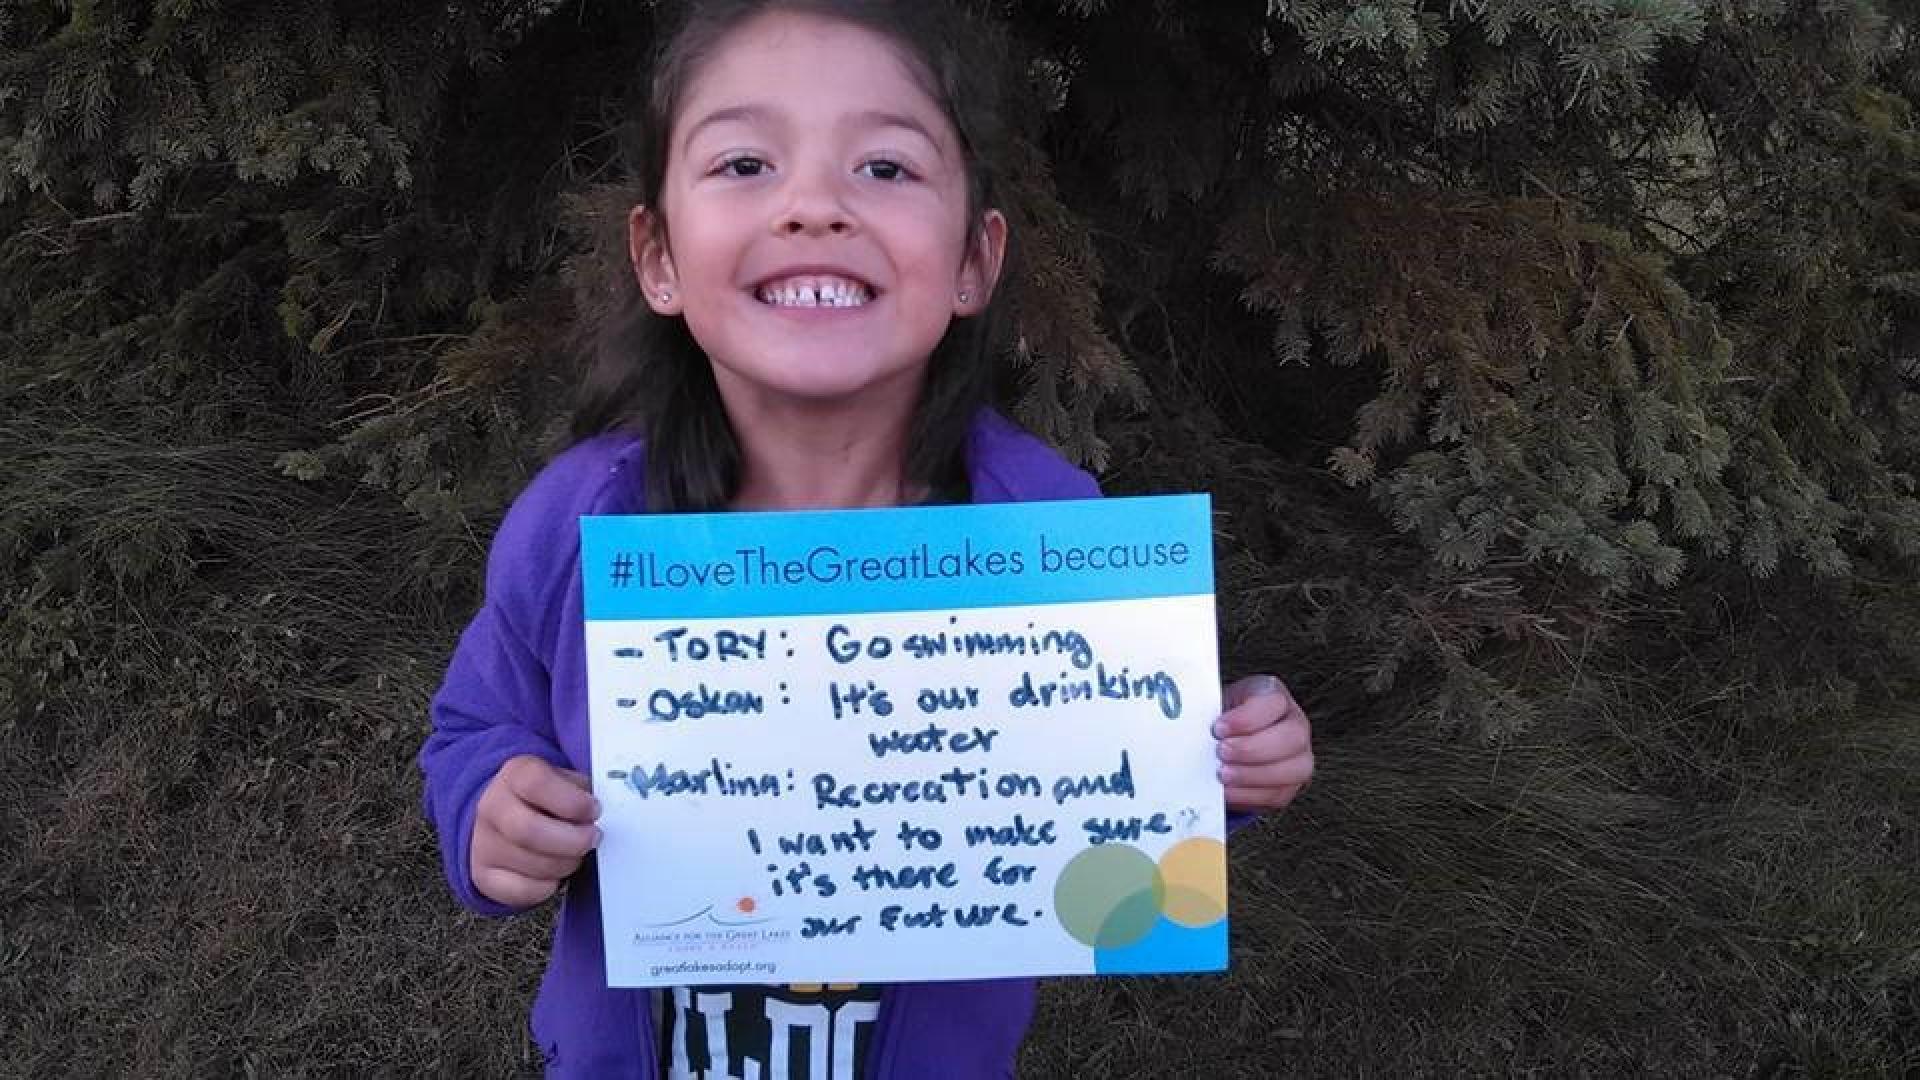 Water Matters - Young girl holding sign "I love the Great Lakes because..."